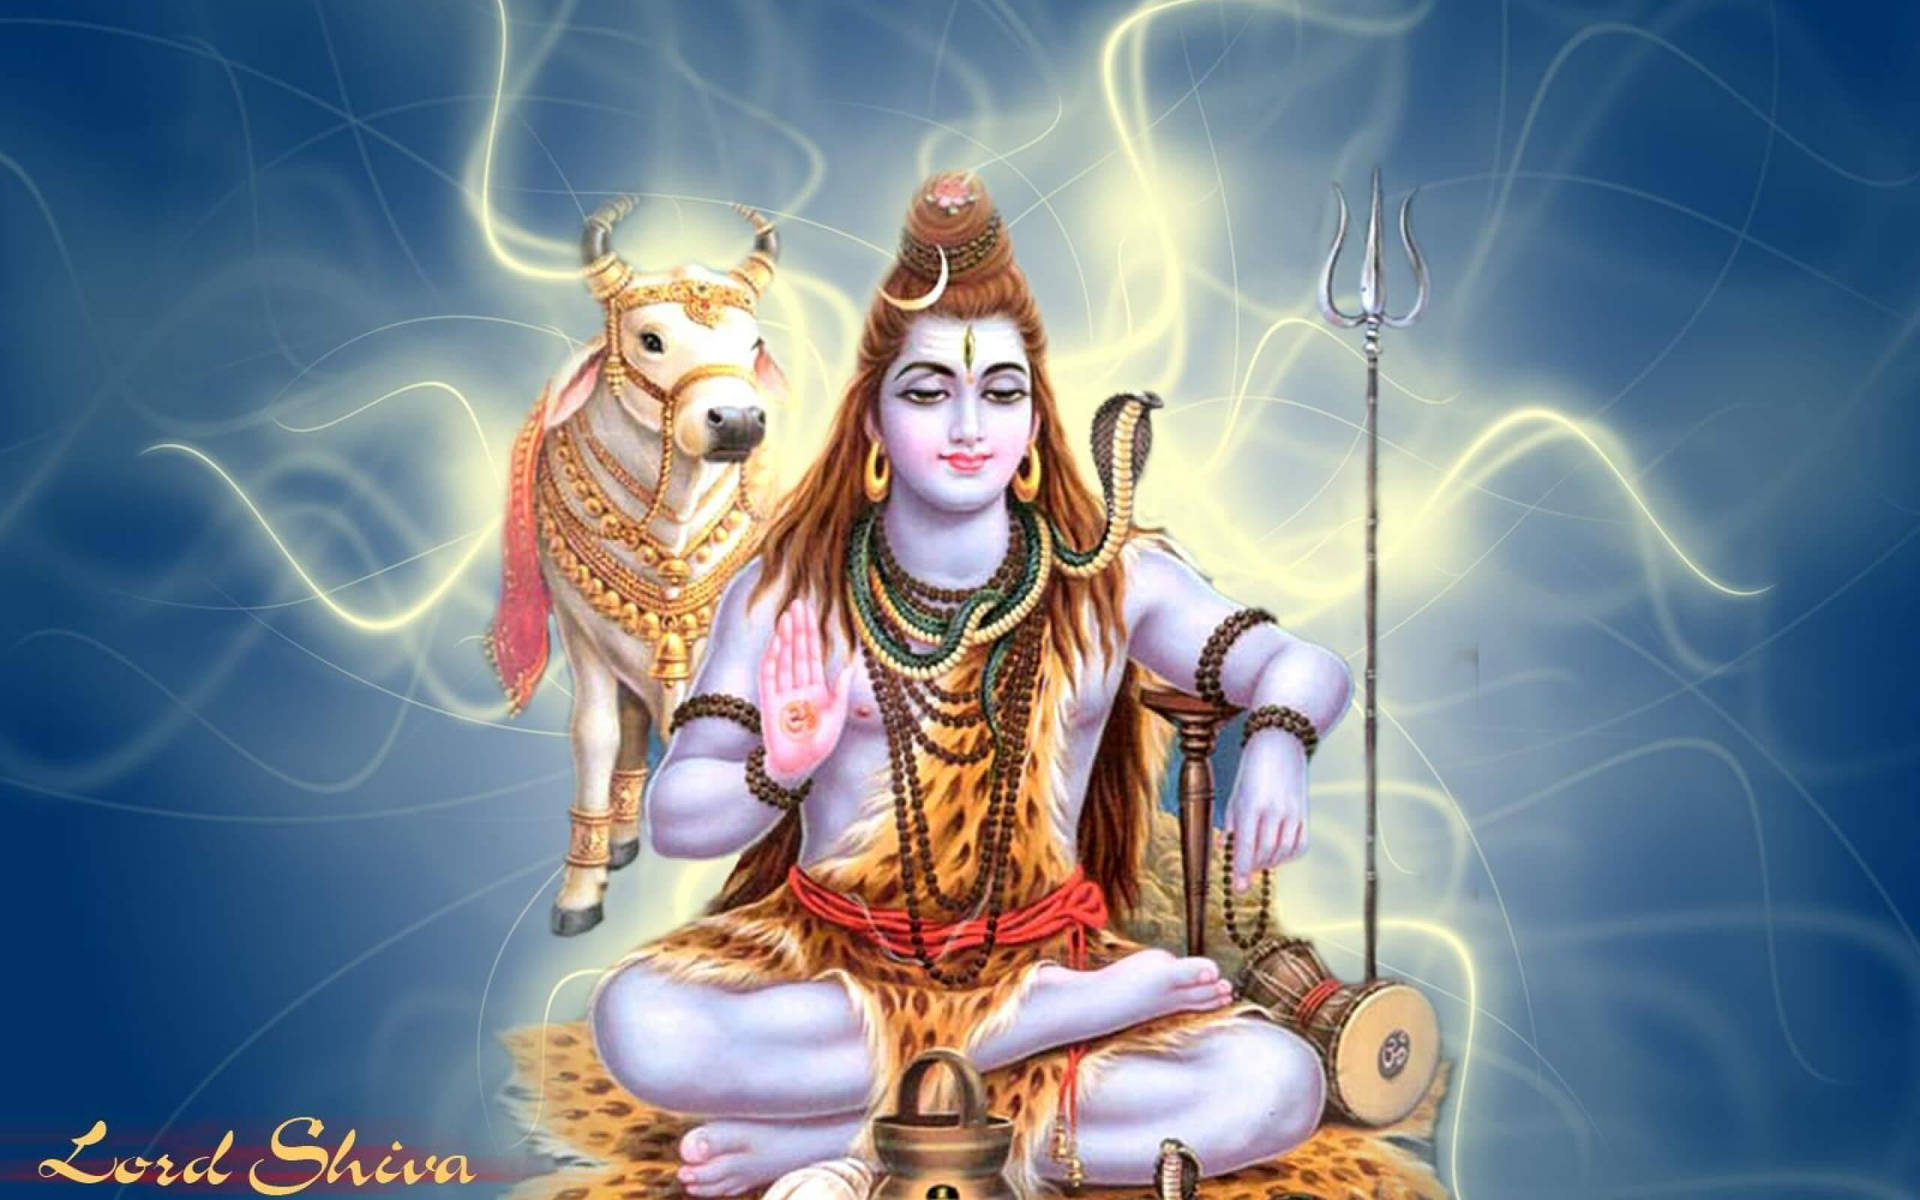 Free Lord Shiva 4k Wallpaper Downloads, [100+] Lord Shiva 4k Wallpapers for  FREE 